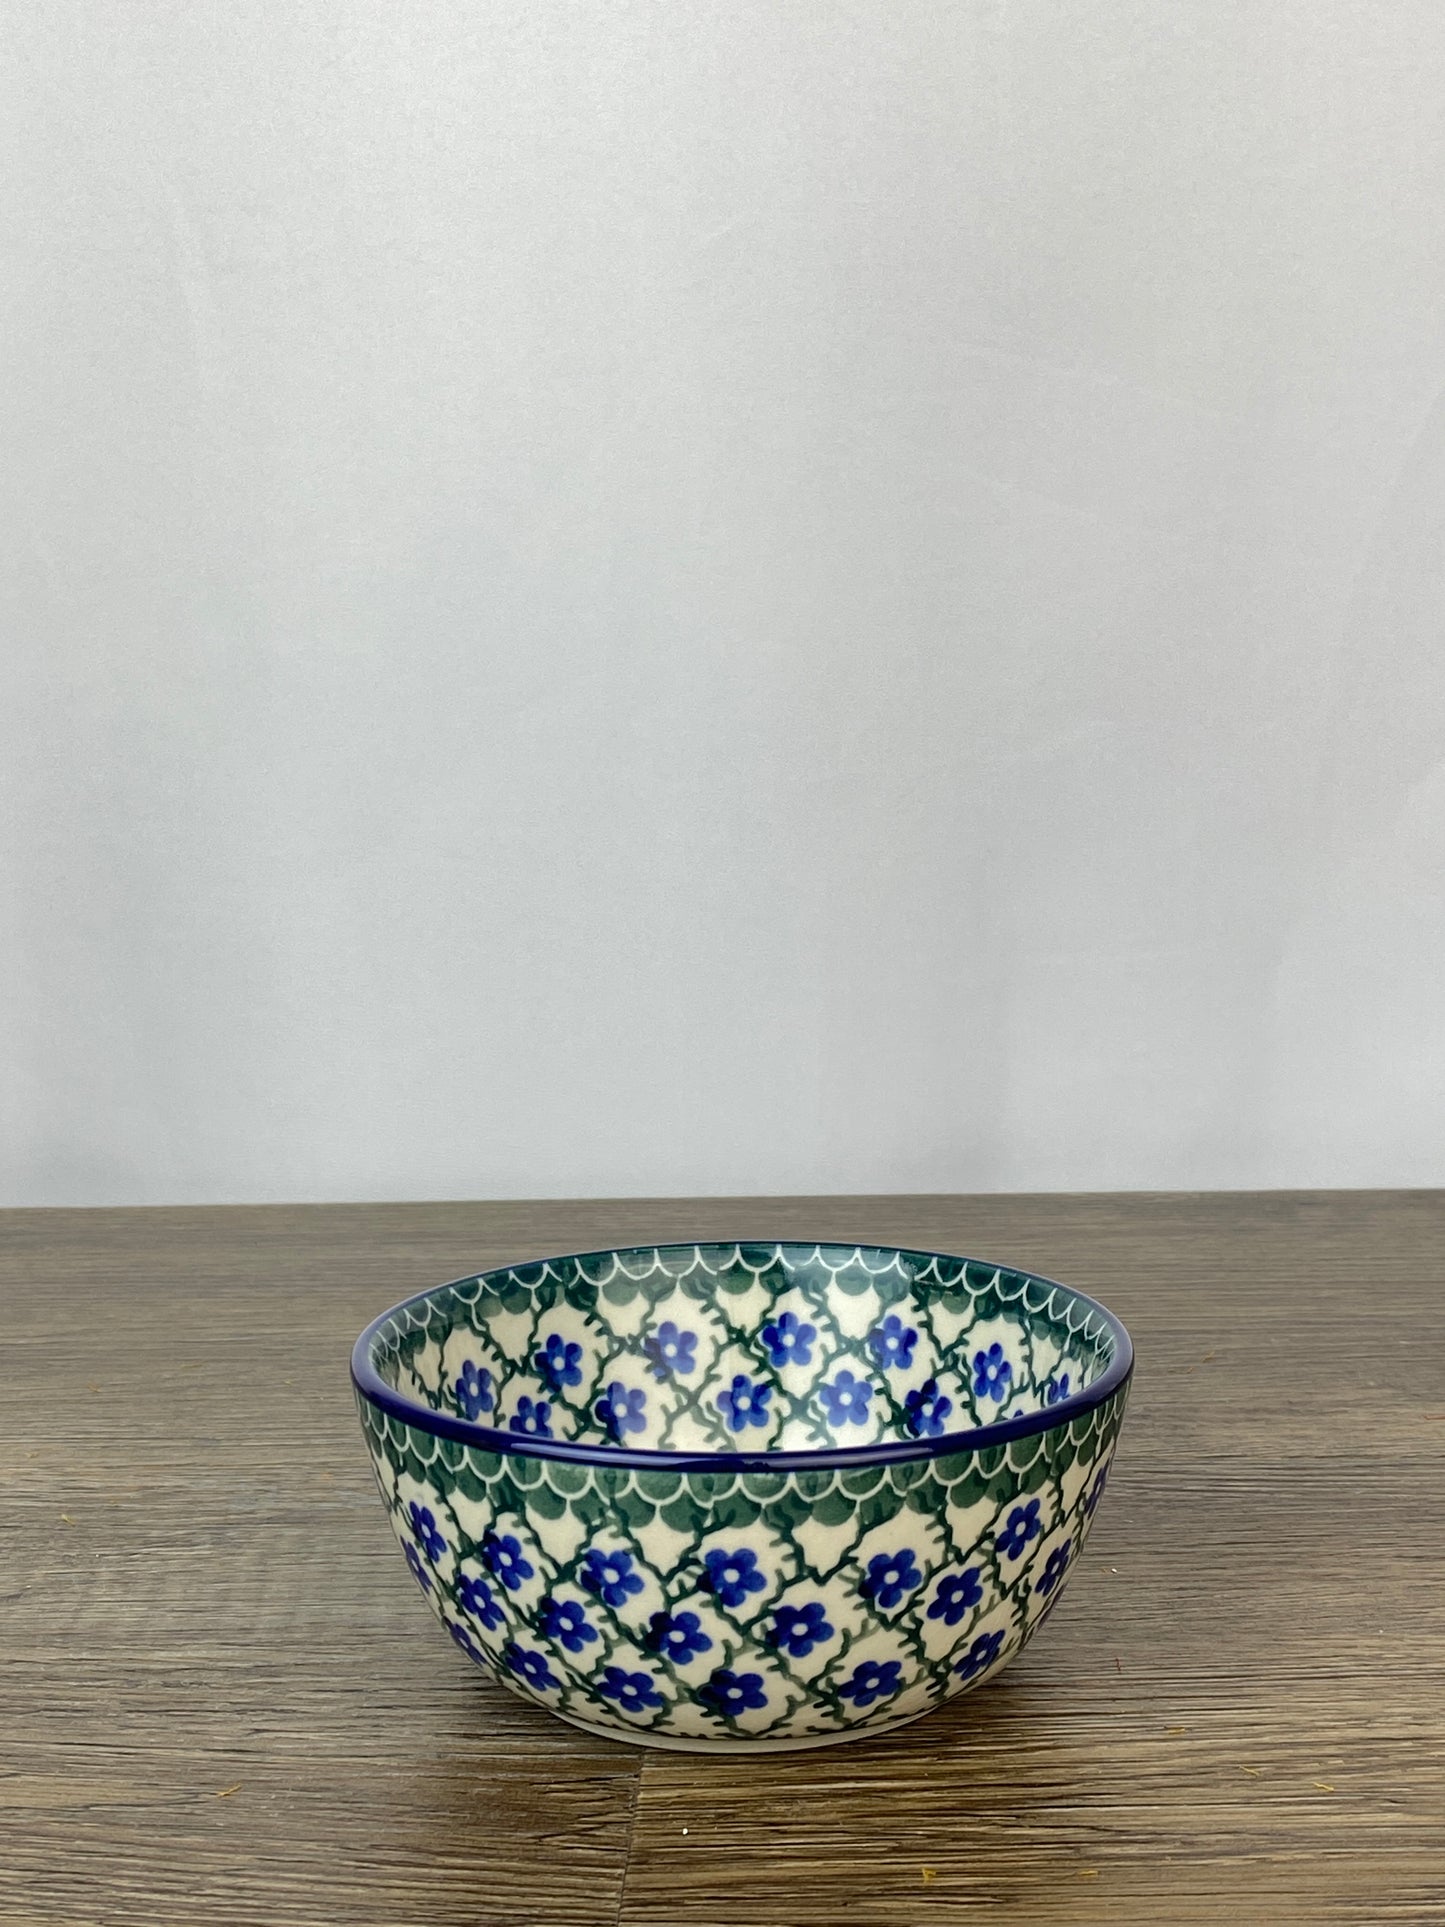 Small Cereal / Dessert Bowl - Shape 17 - Pattern 866